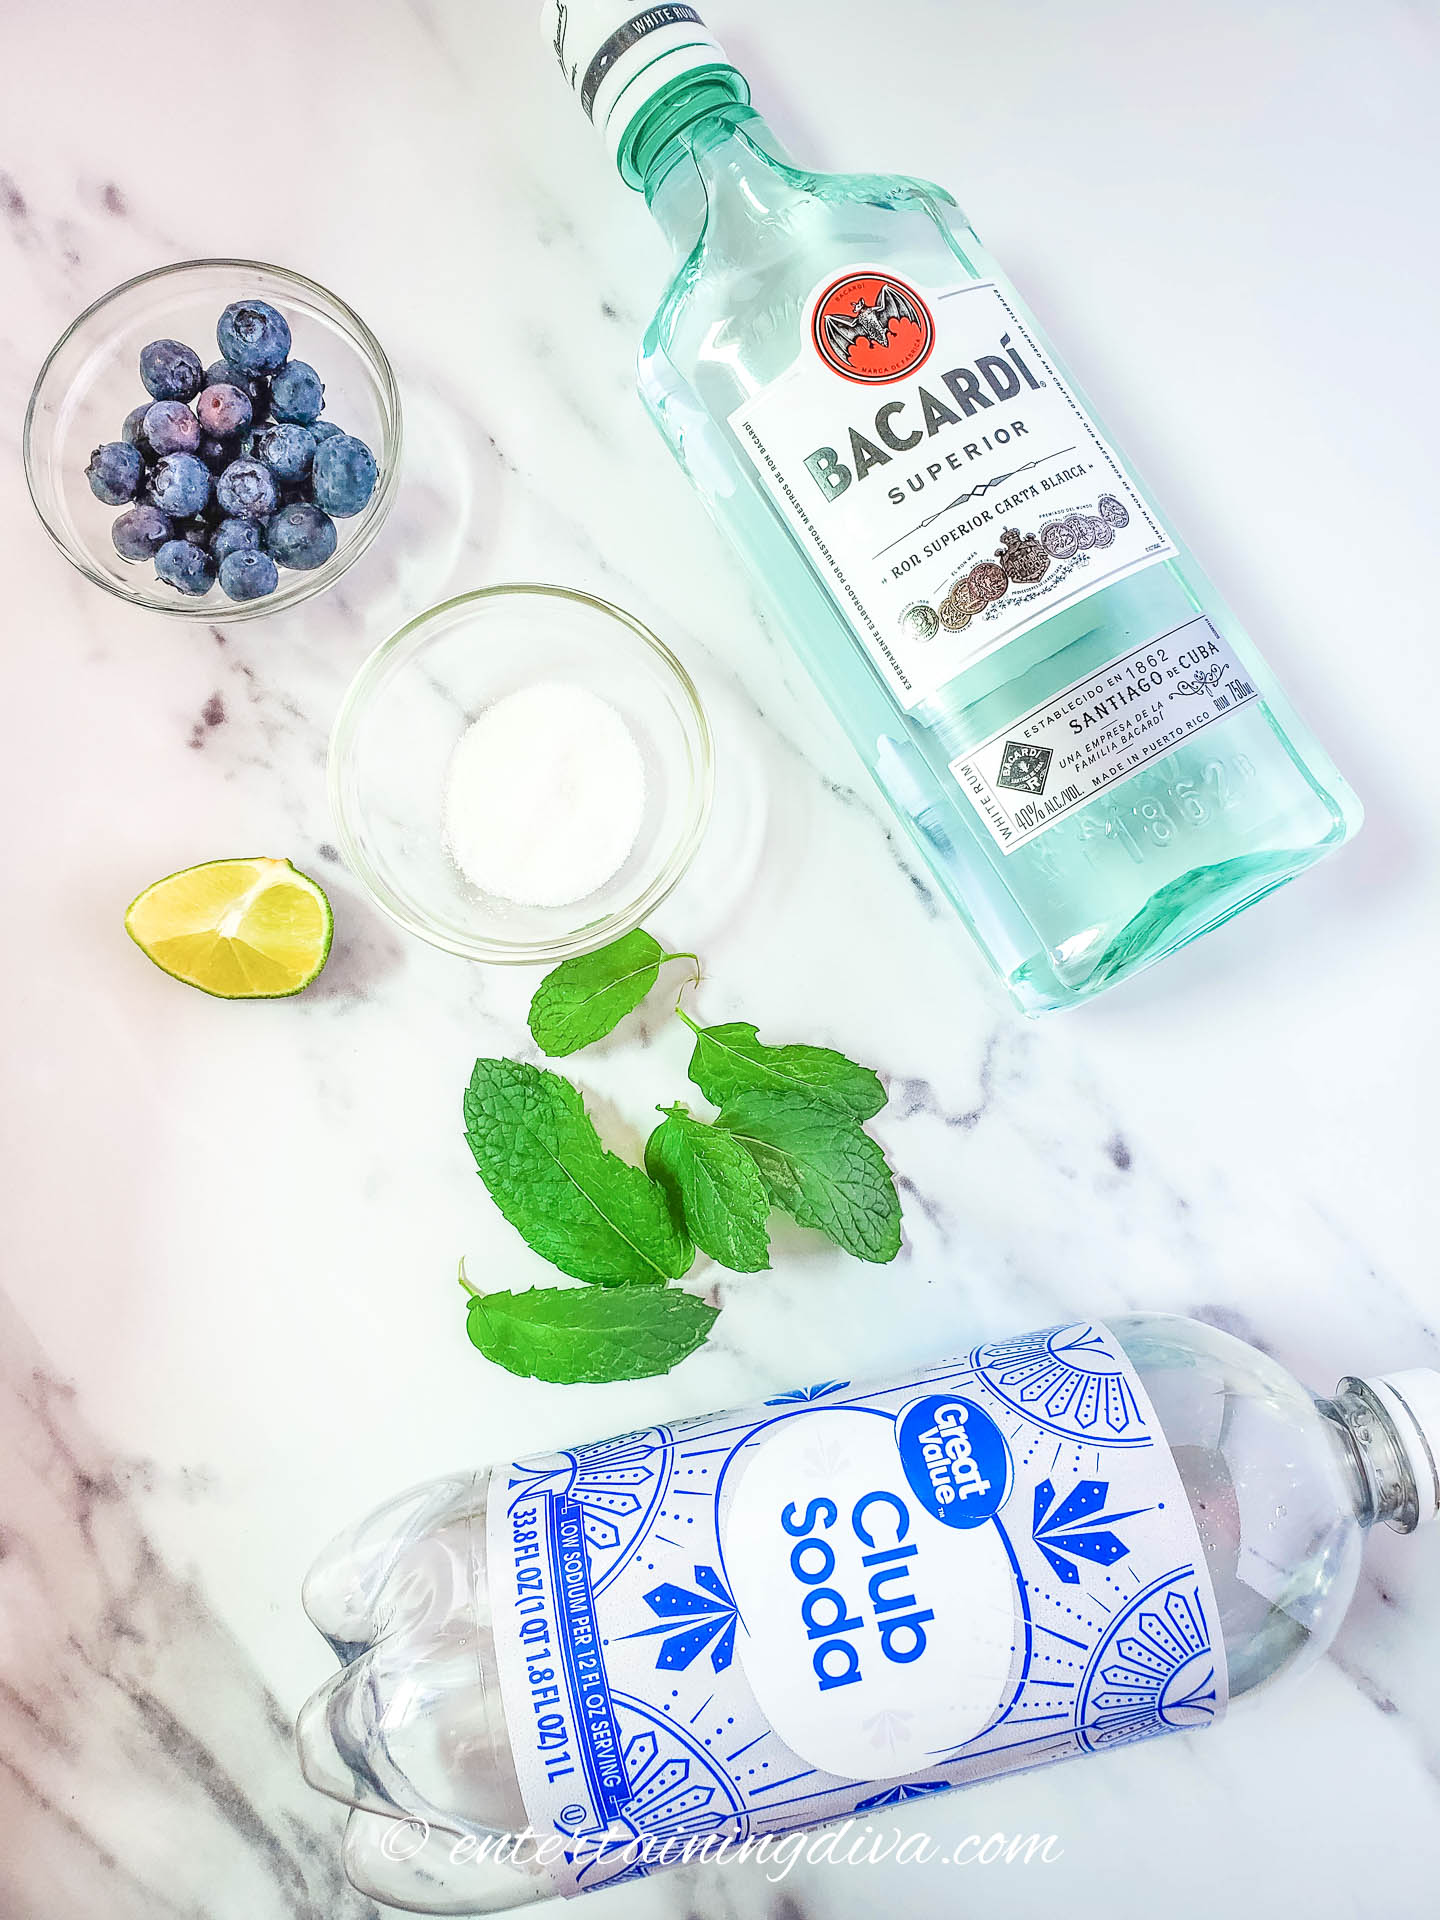 Ingredients for a blueberry mojito - fresh blueberries, rum, sugar, lime juice, mint leaves and club soda